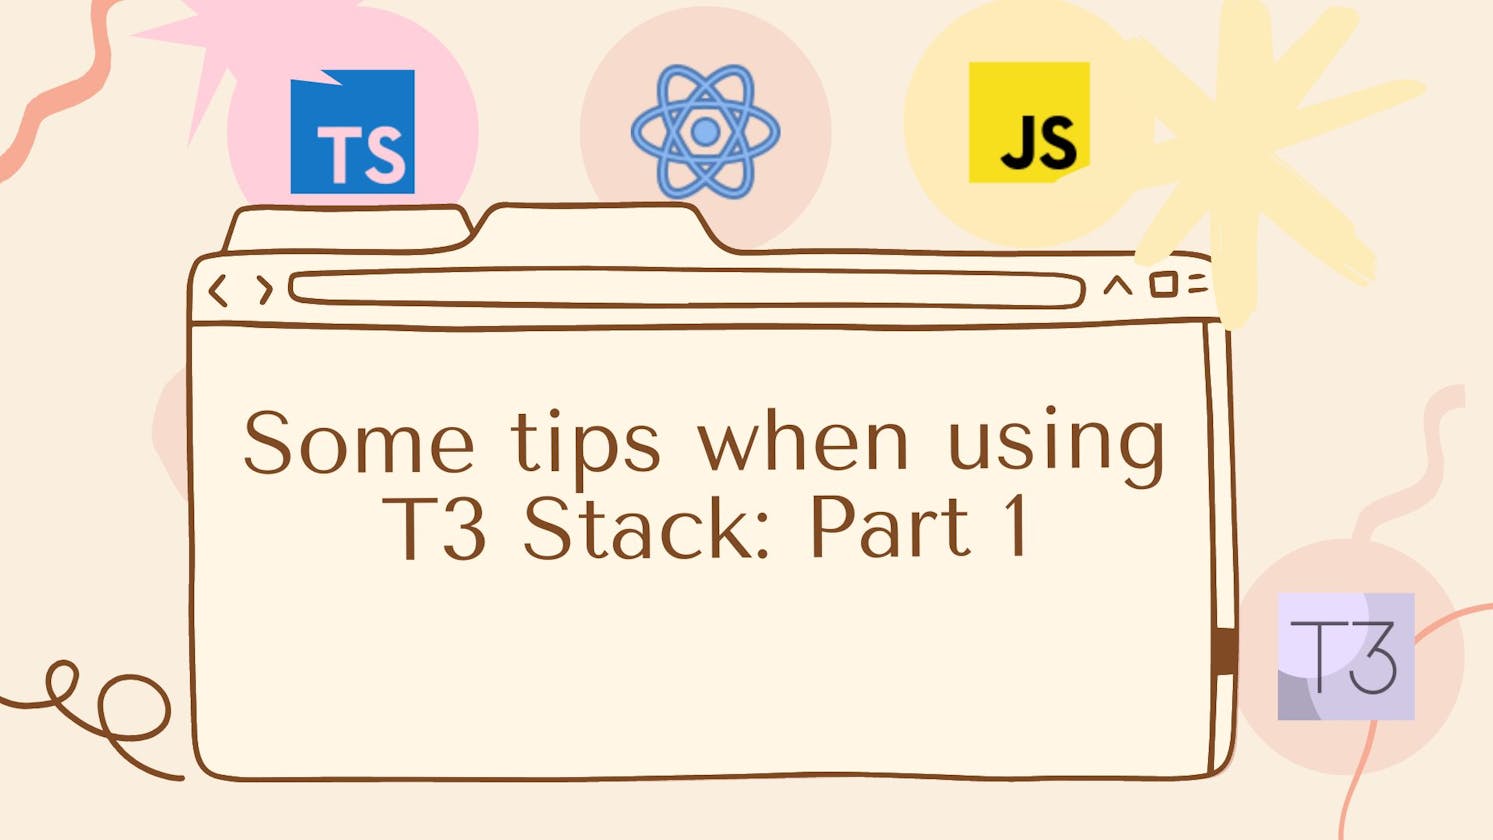 Some tips when using T3 Stack: NextAuth and Models types